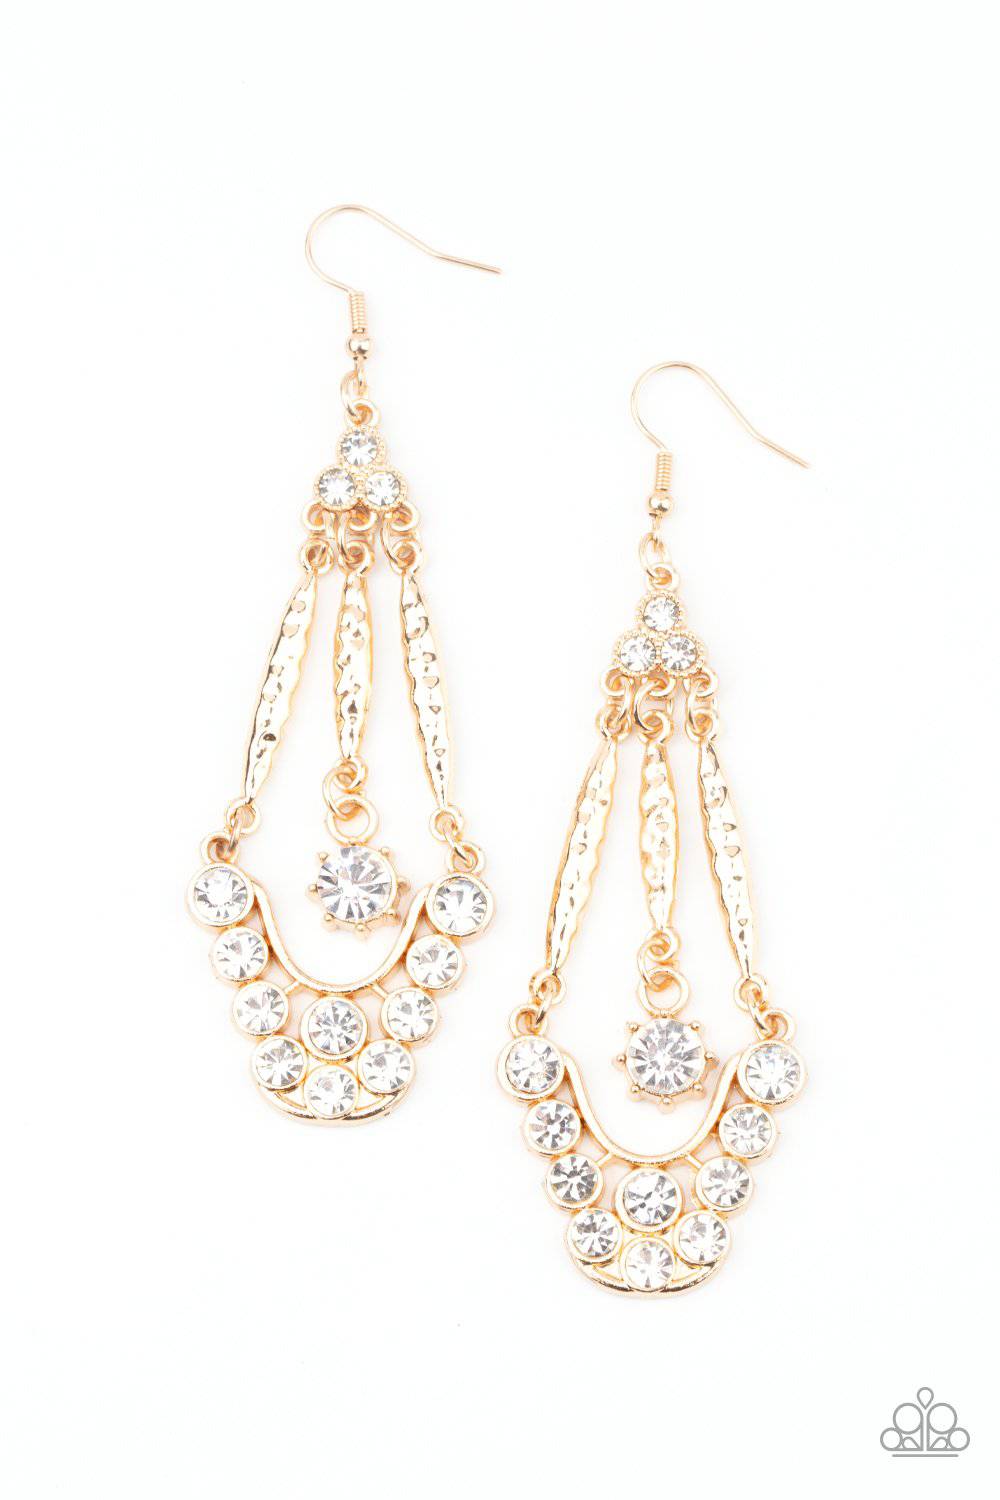 D301 - High-Ranking Radiance, Paparazzi Gold Earring by Paparazzi Accessories on Fancy5Fashion.com